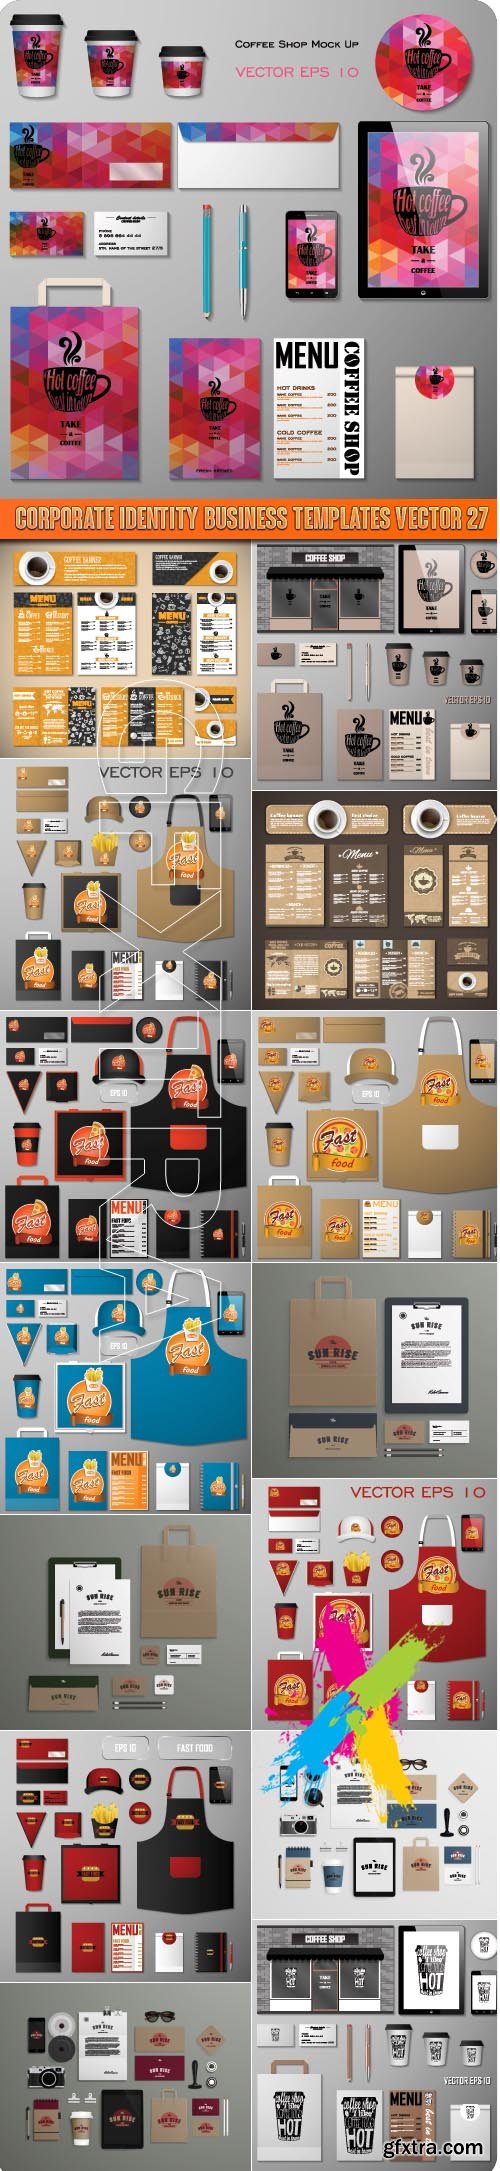 Corporate identity business templates vector 27